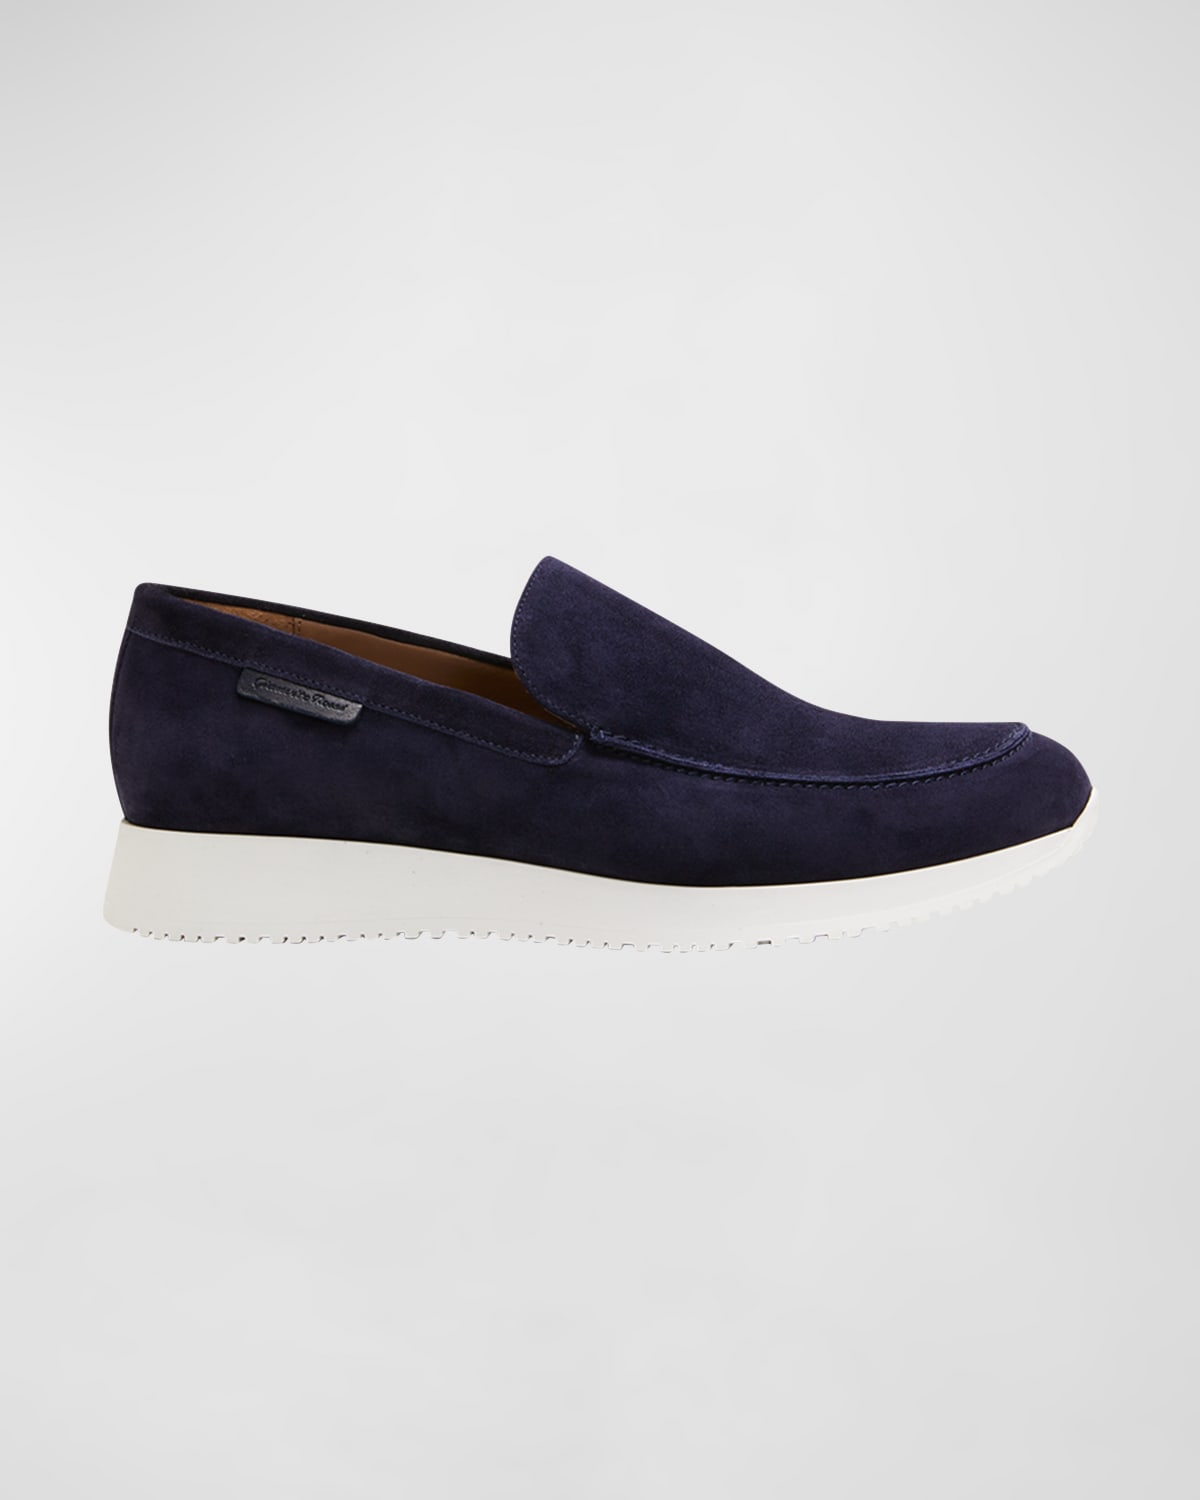 Men's Rubber-Sole Suede Loafers